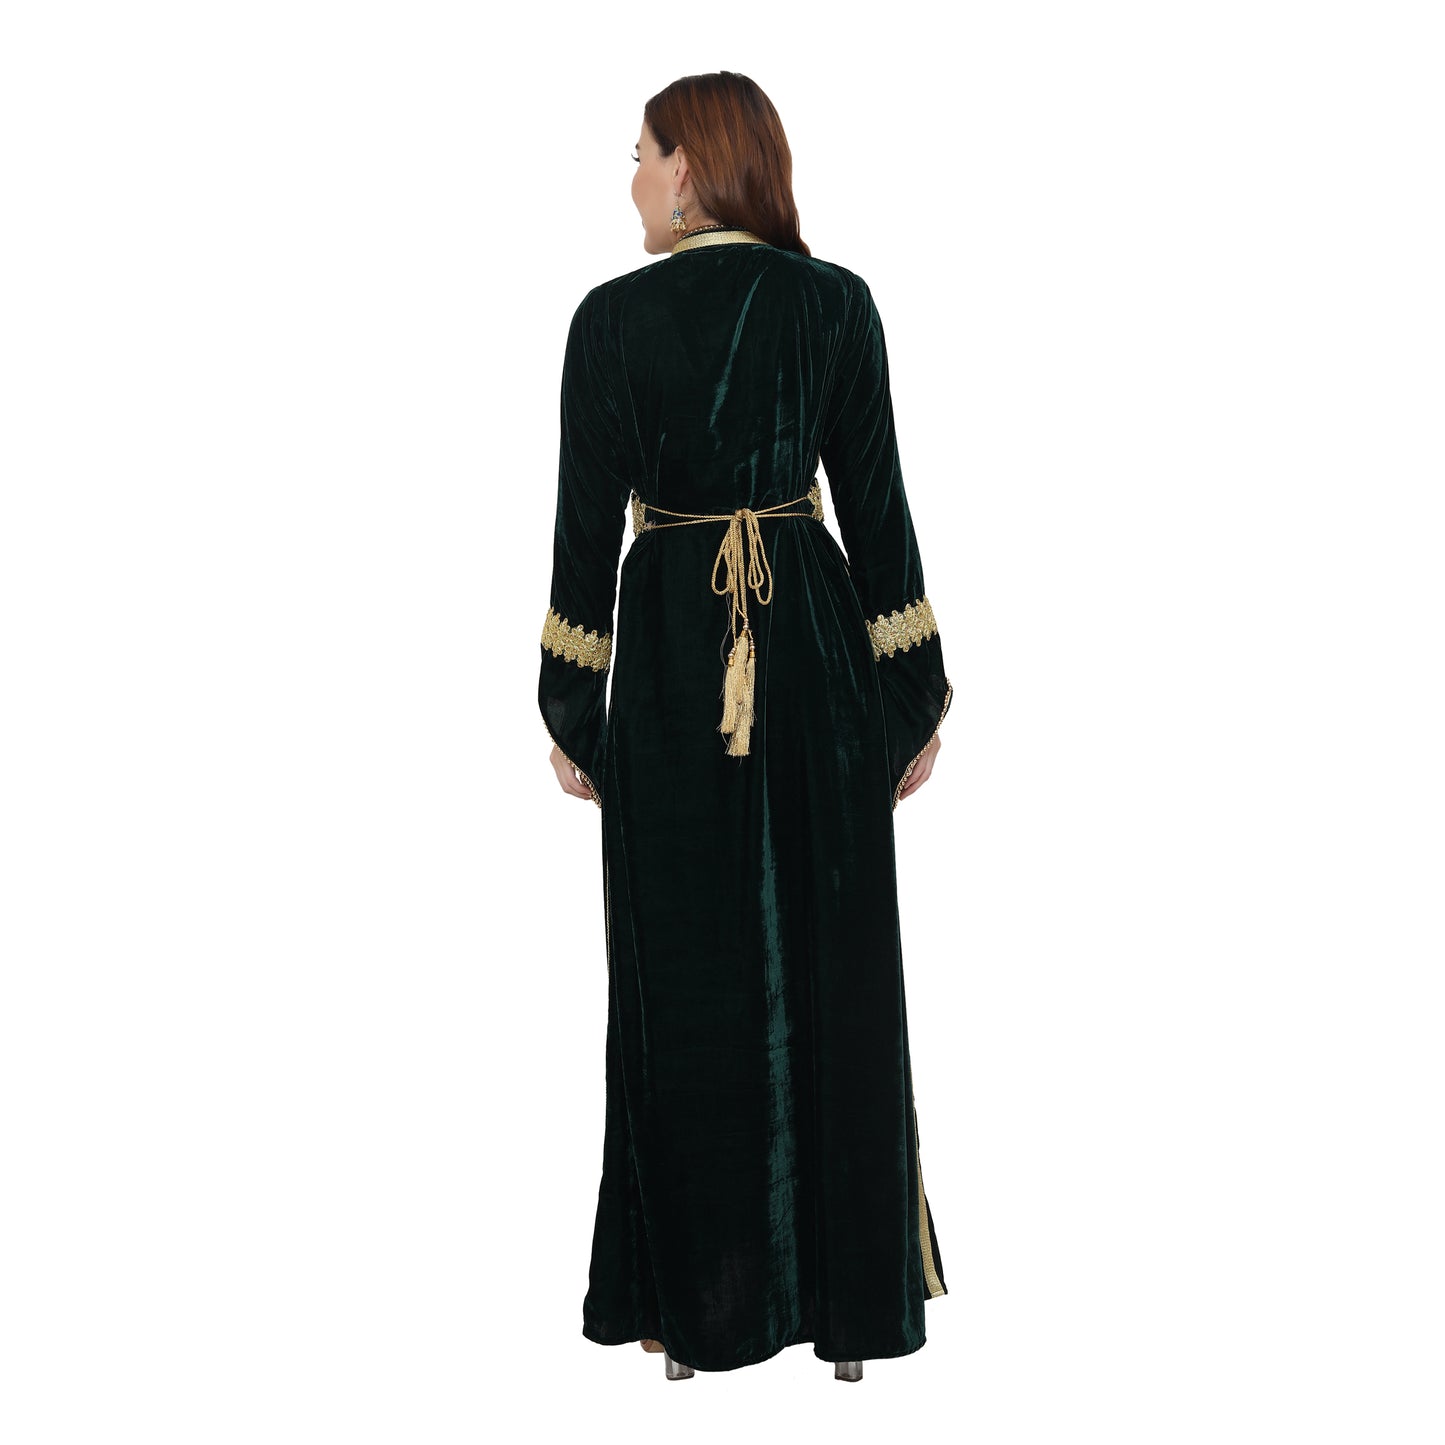 Men's Velvet Smoking Jacket Robe and Quilted Silk Dressing Gown